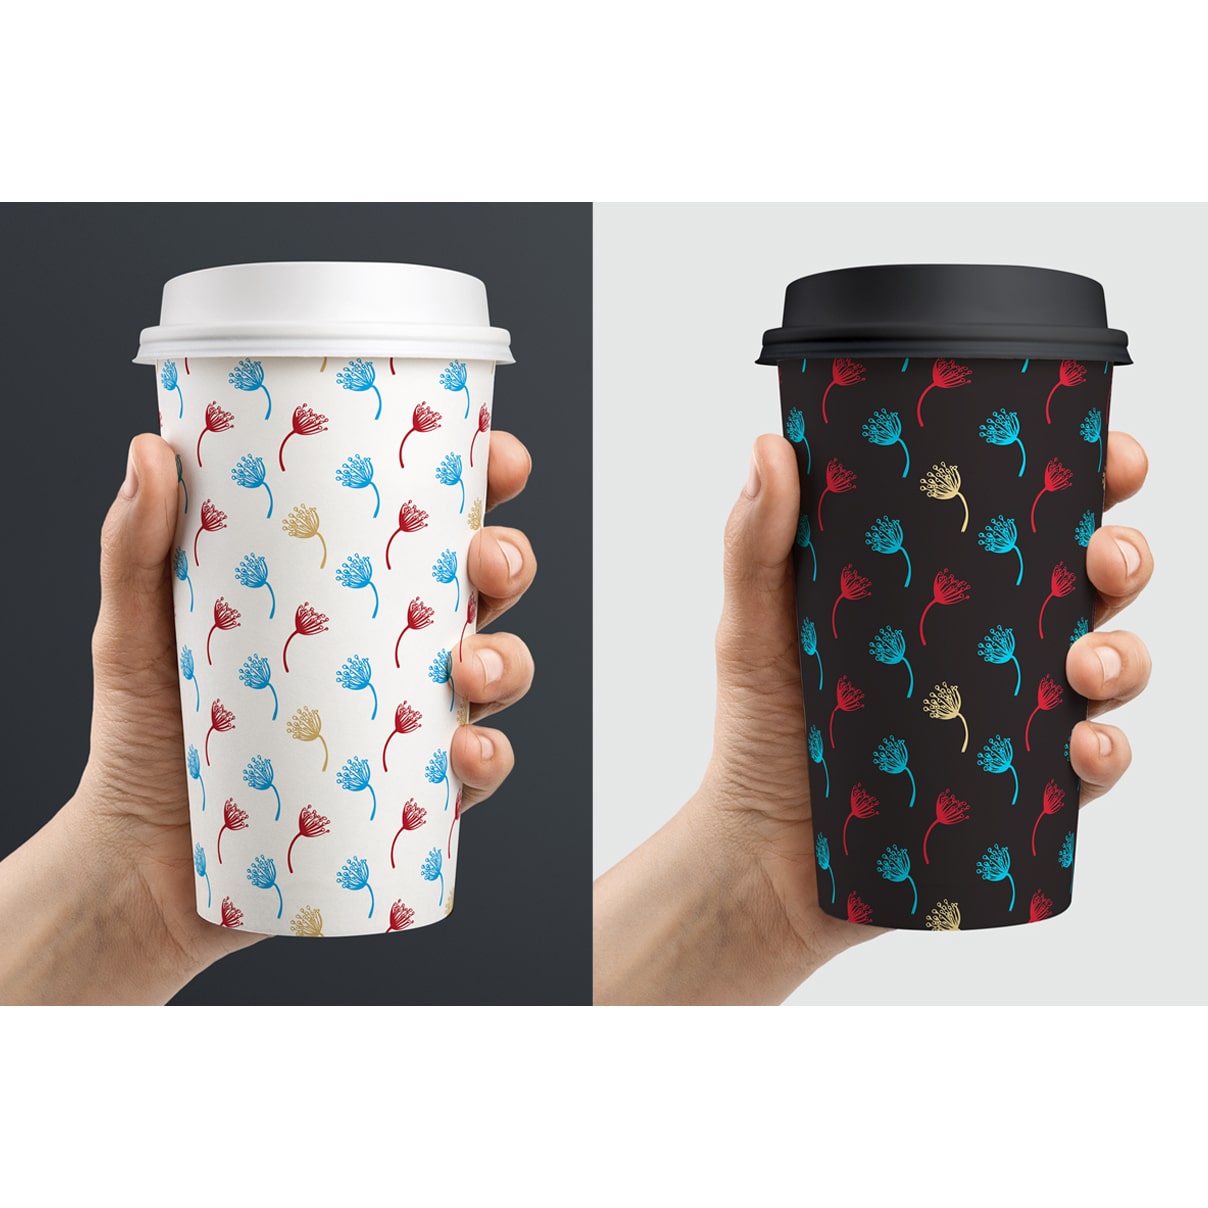 Hand Drawn Floral Collection coffee cup.